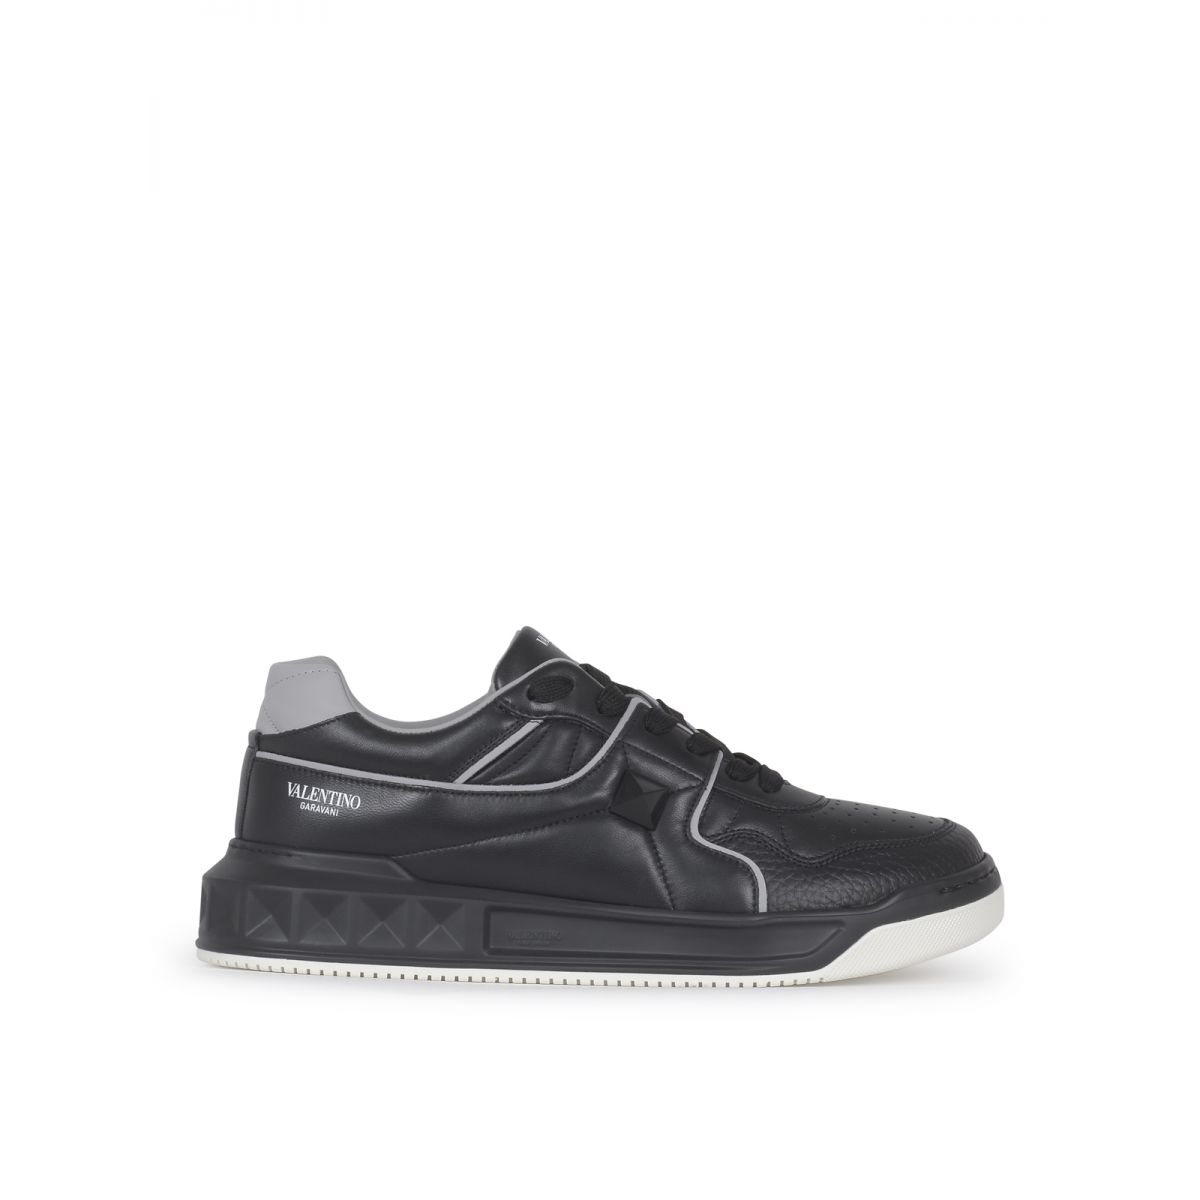 Valentino - One stud low-top nappa sneaker black and grey